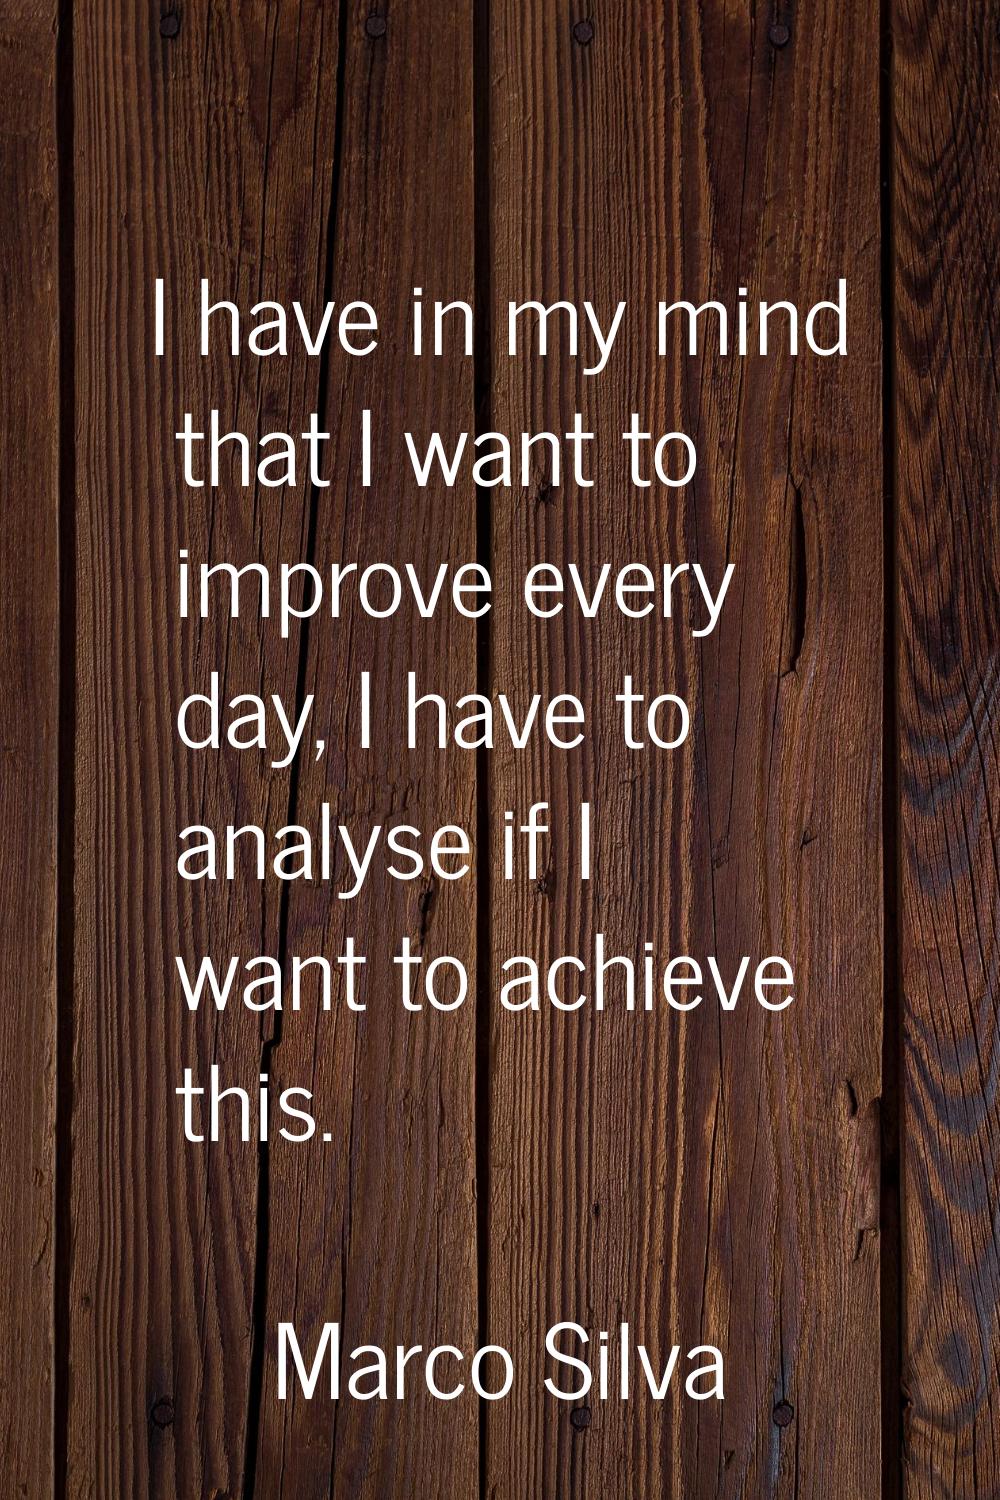 I have in my mind that I want to improve every day, I have to analyse if I want to achieve this.